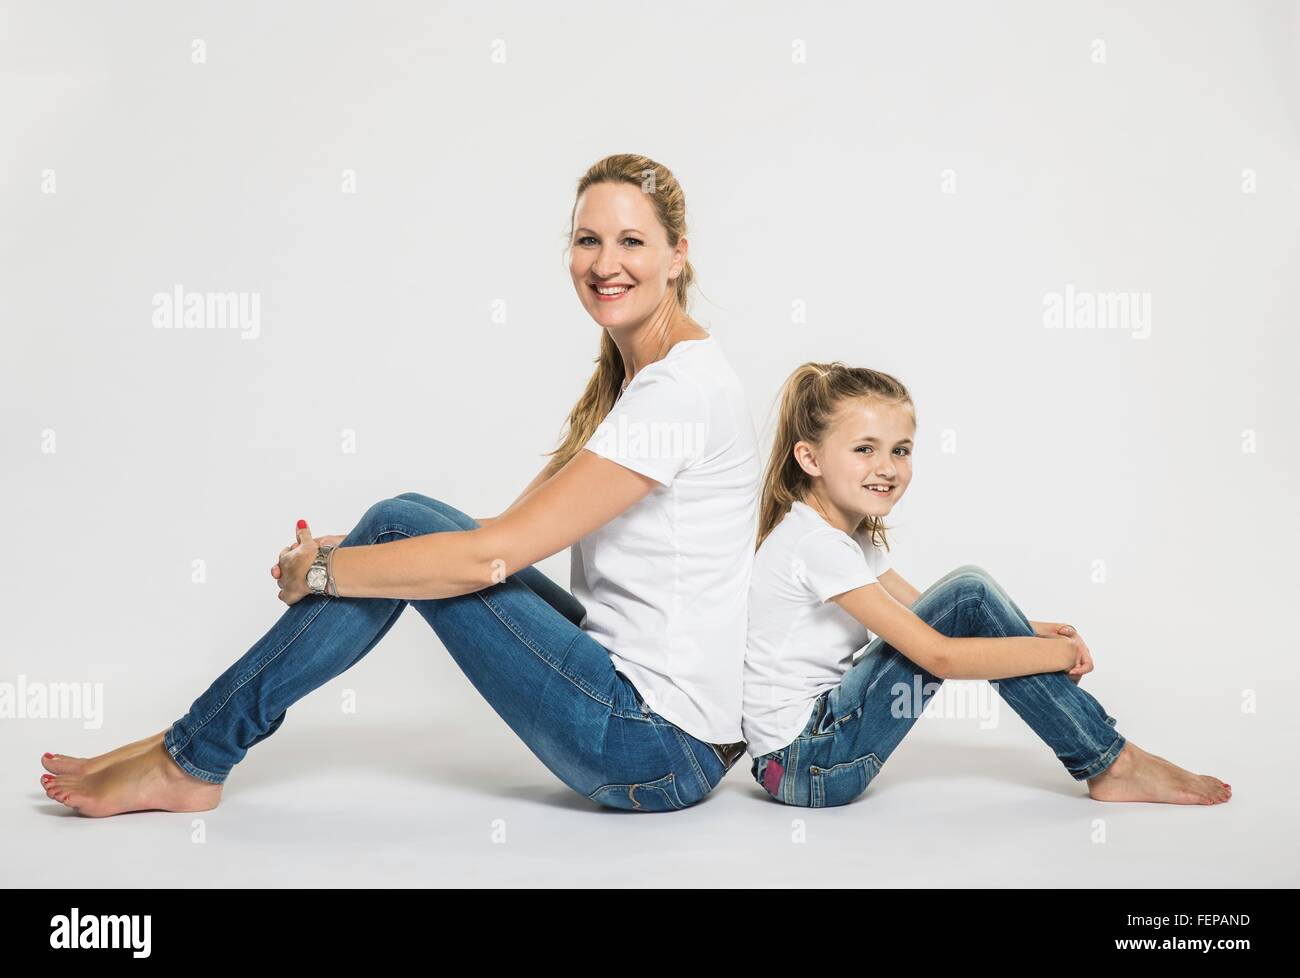 Studio portrait of girl and mother sitting back to back on floor Stock Photo